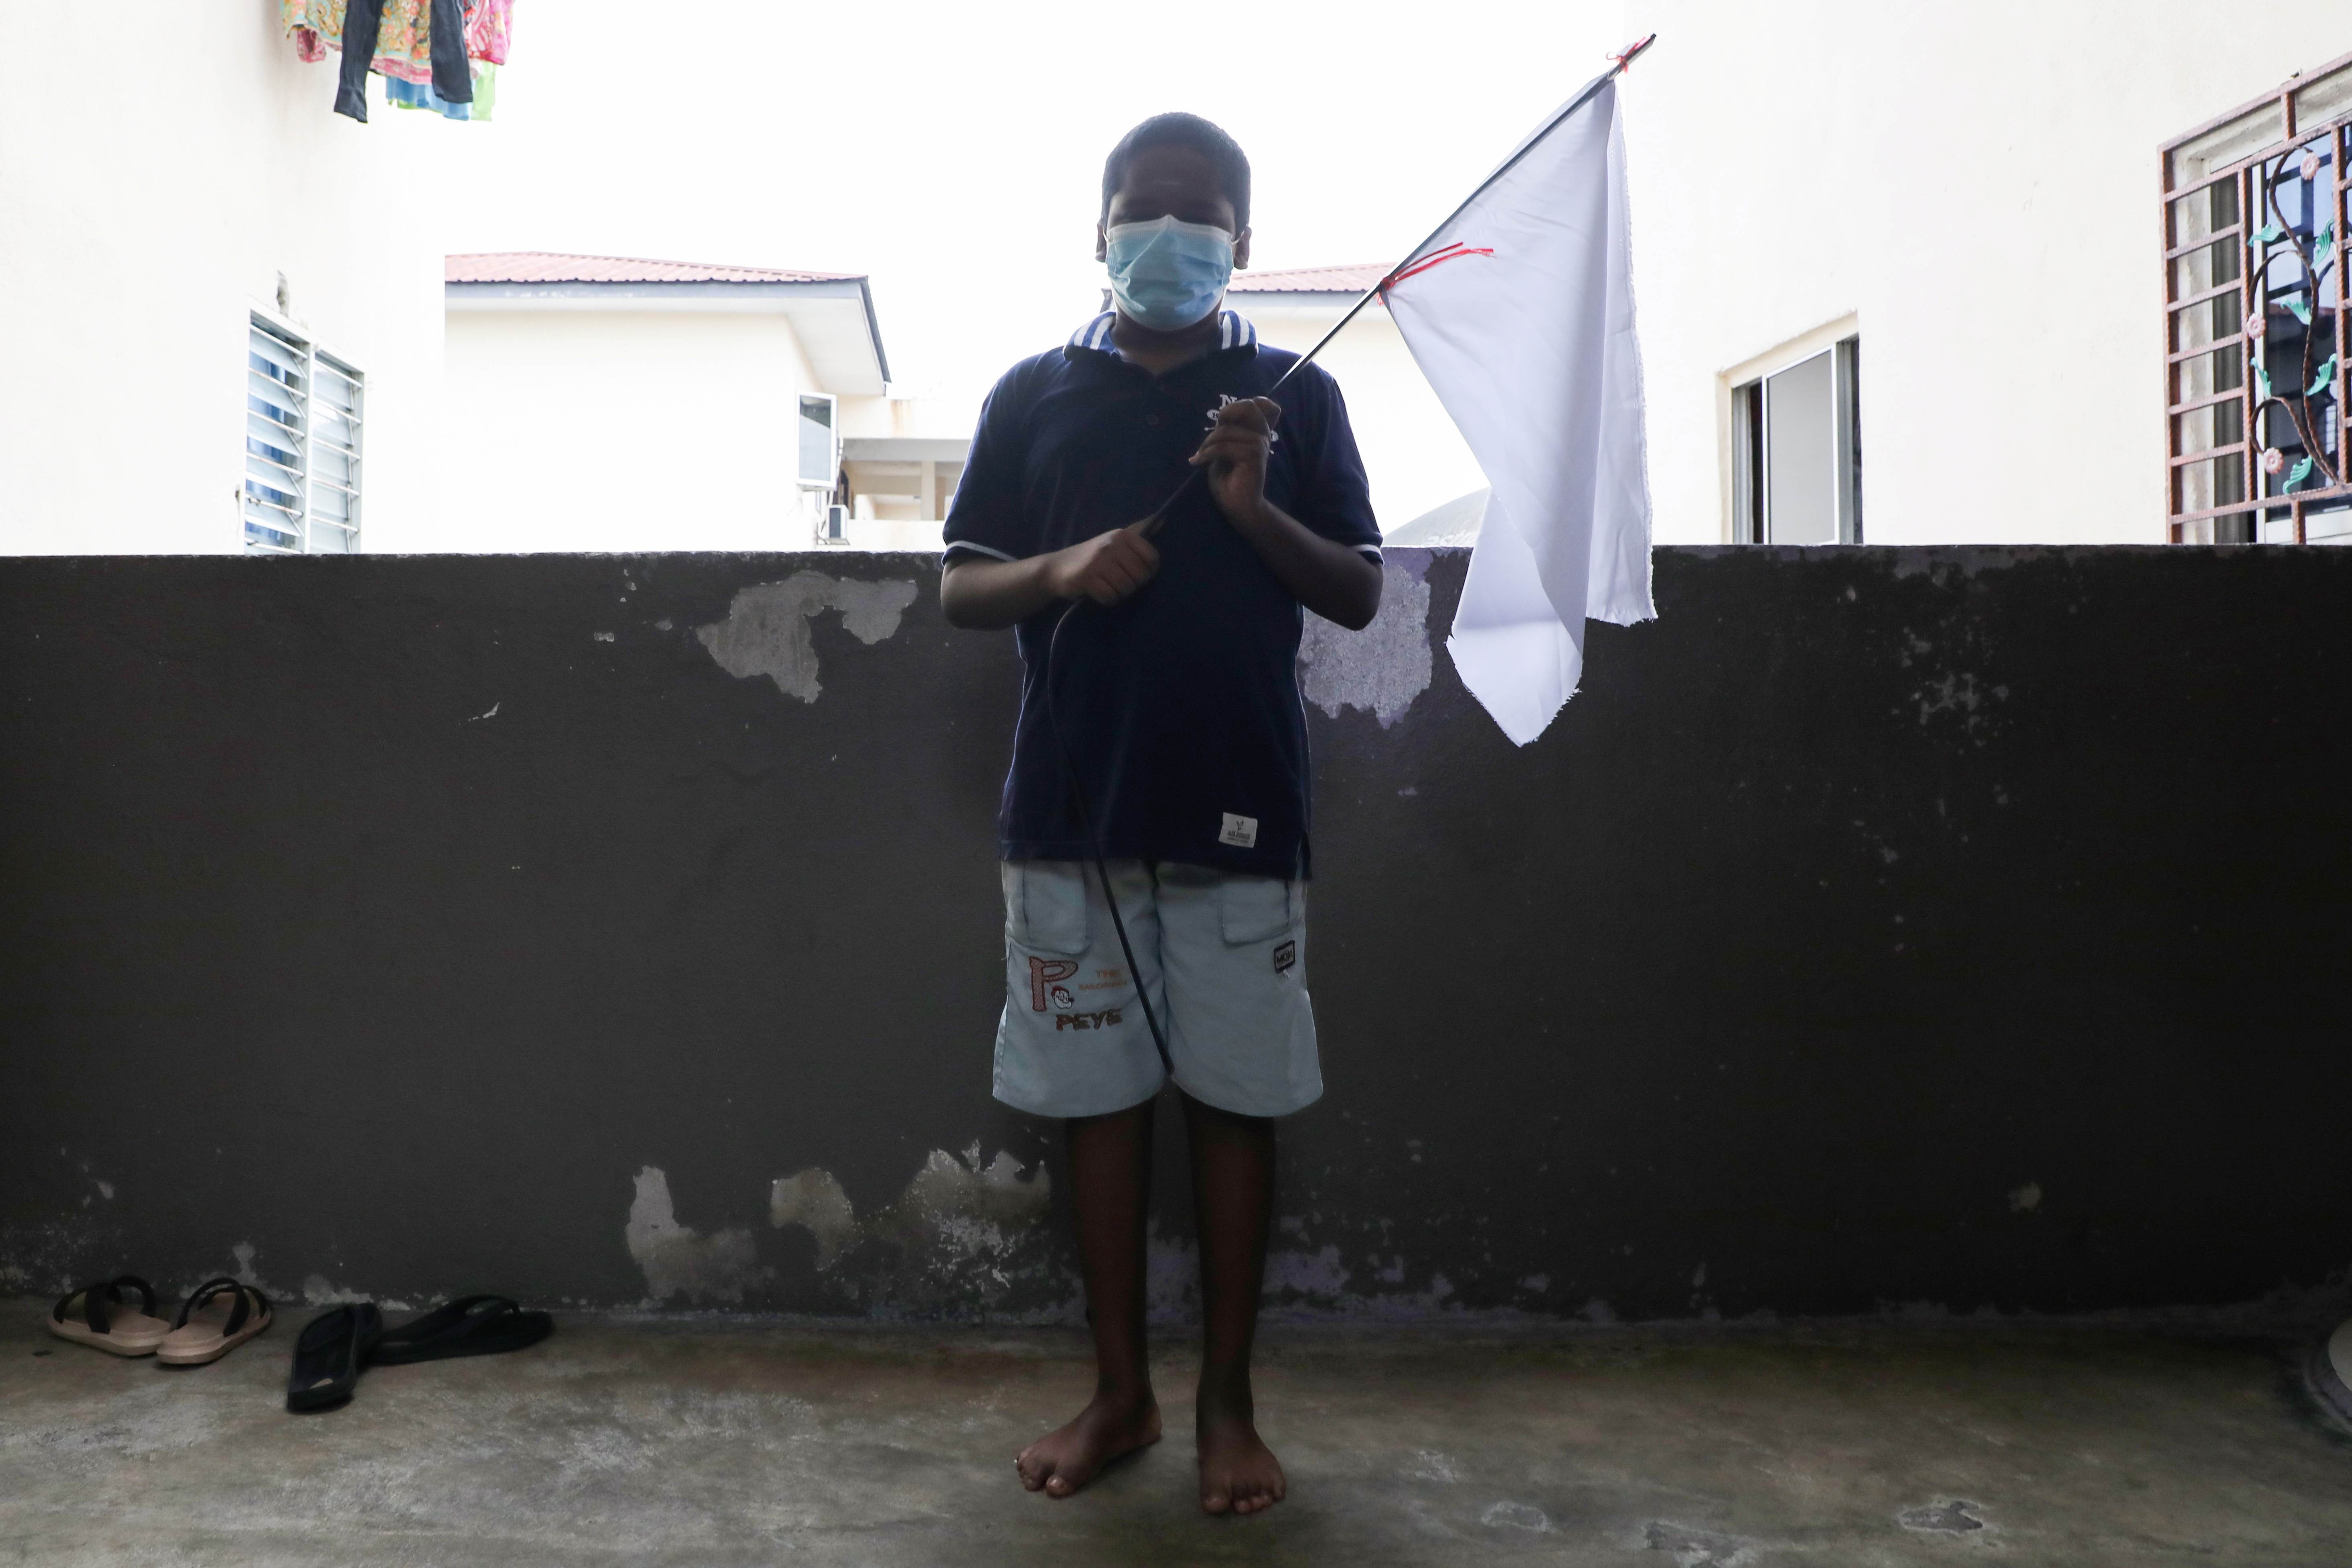 A boy holds a white flag which his family hung to ask for help, during an enhanced lockdown in Petaling Jaya